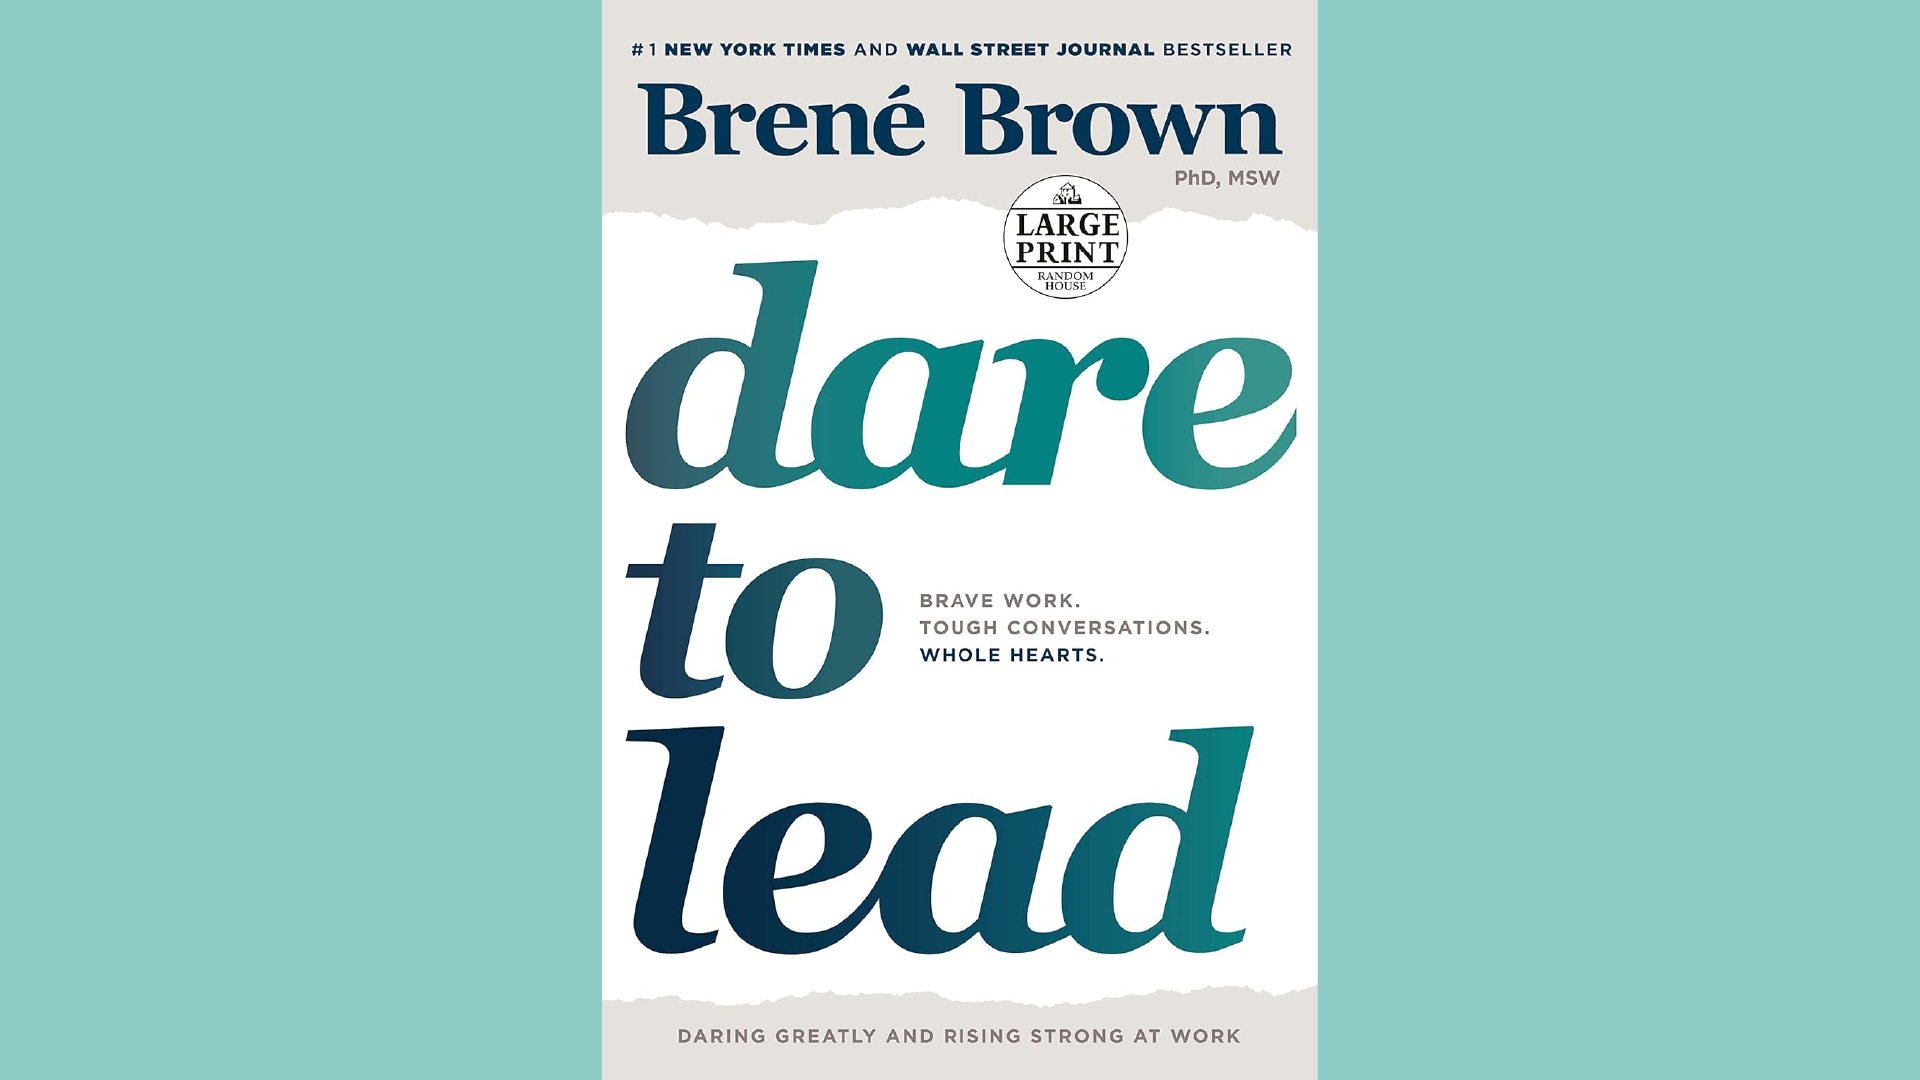 Summary: Dare to Lead by Brene Brown